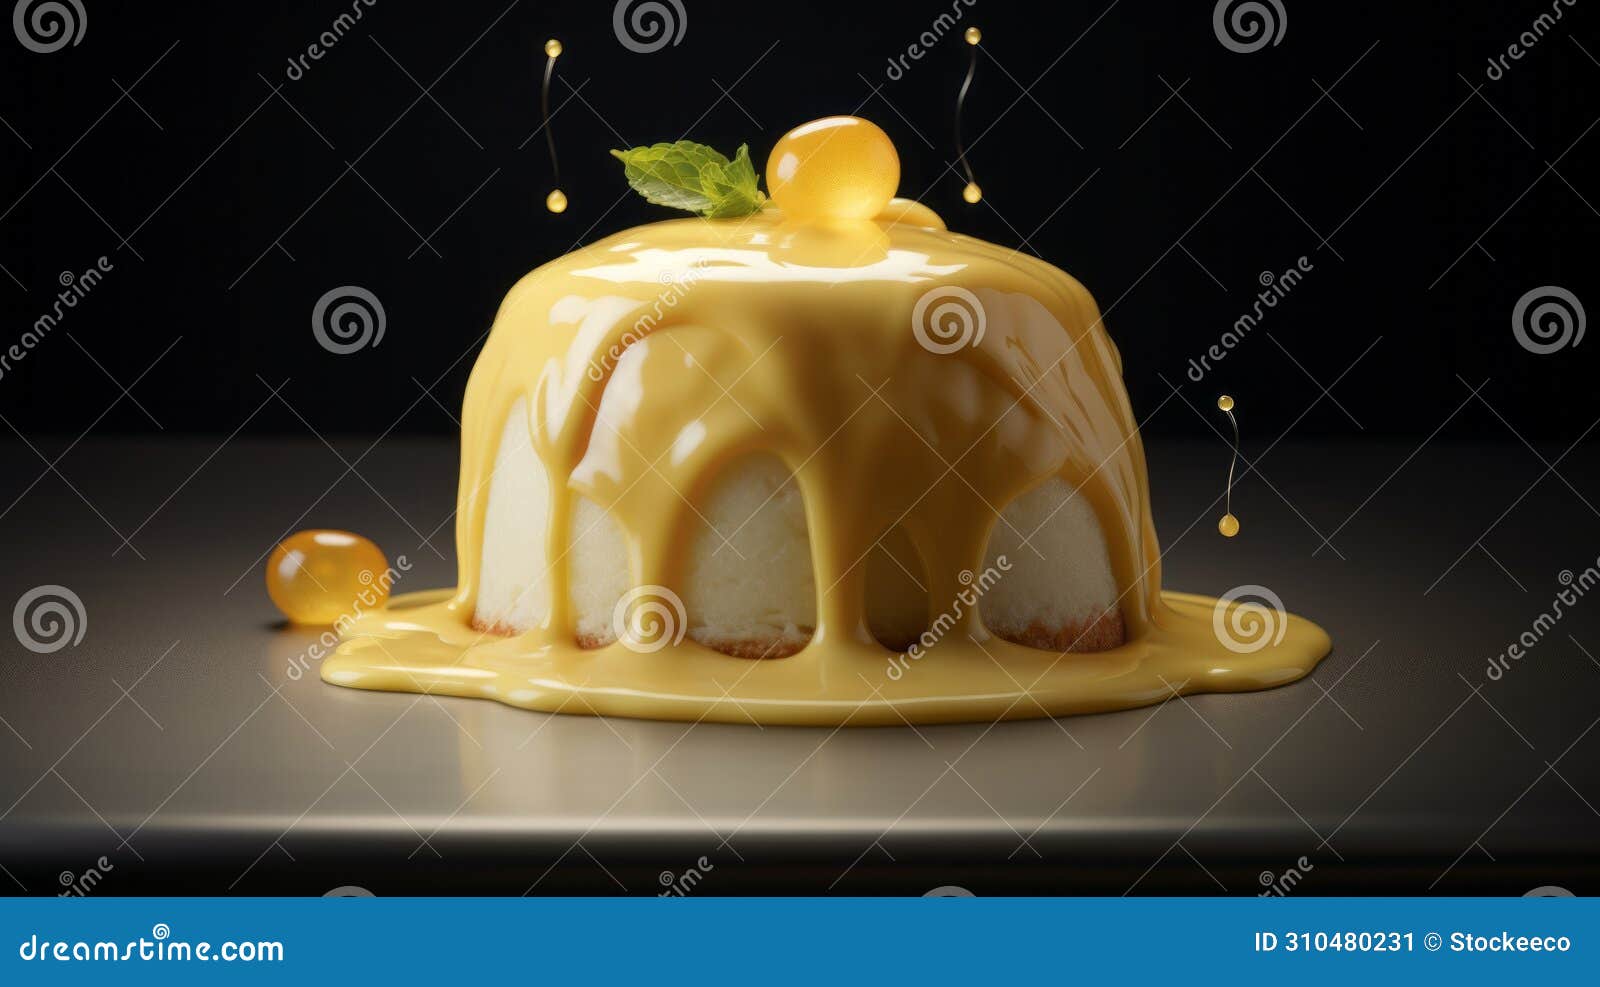 immersive custard image inspired by olivier ledroit, miki asai, and herve guibert